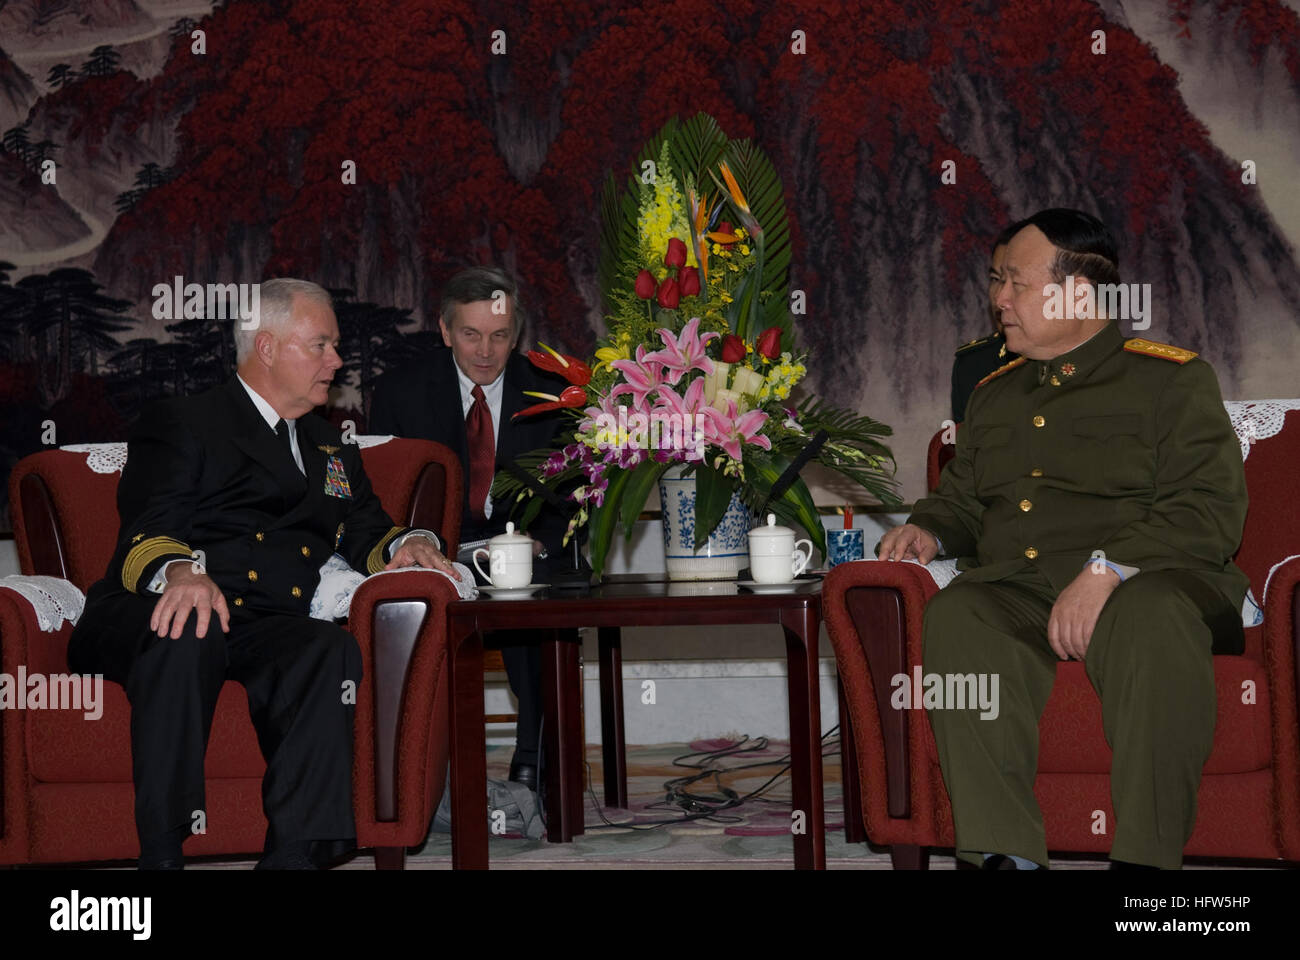 080114-N-8623G-044 BEIJING (Jan 14, 2008) Adm. Timothy J. Keating, commander of U.S. Pacific Command, and Gen. Guo Boxiong, vice chairman of the Central Military Commission meet in Beijing. Keating was in Beijing to meet with military and government officials. U.S. Navy photo by Mass Communication Specialist 2nd Class Elisia V. Gonzales (Released) US Navy 080114-N-8623G-044 Adm. Timothy J. Keating, commander of U.S. Pacific Command, and Gen. Guo Boxiong, vice chairman of the Central Military Commission meet in Beijing Stock Photo